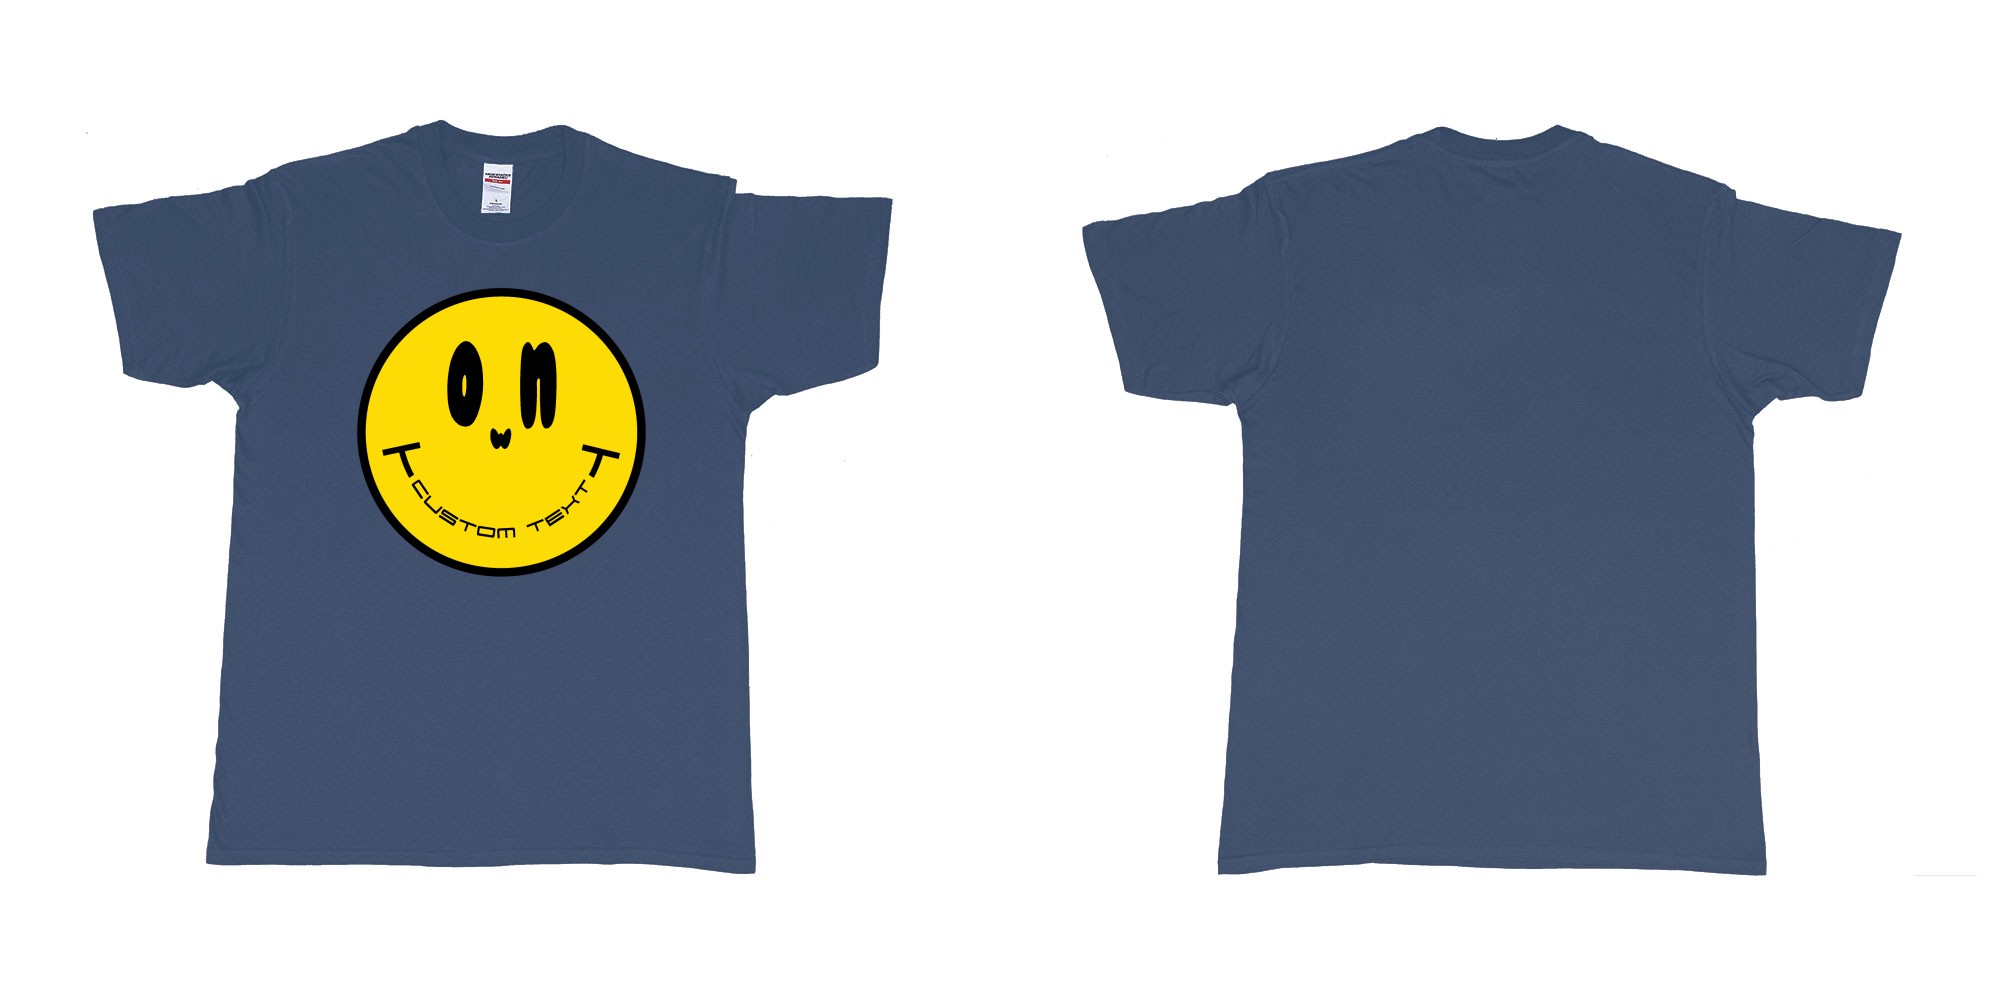 Custom tshirt design smiley face emoji custom text in fabric color navy choice your own text made in Bali by The Pirate Way